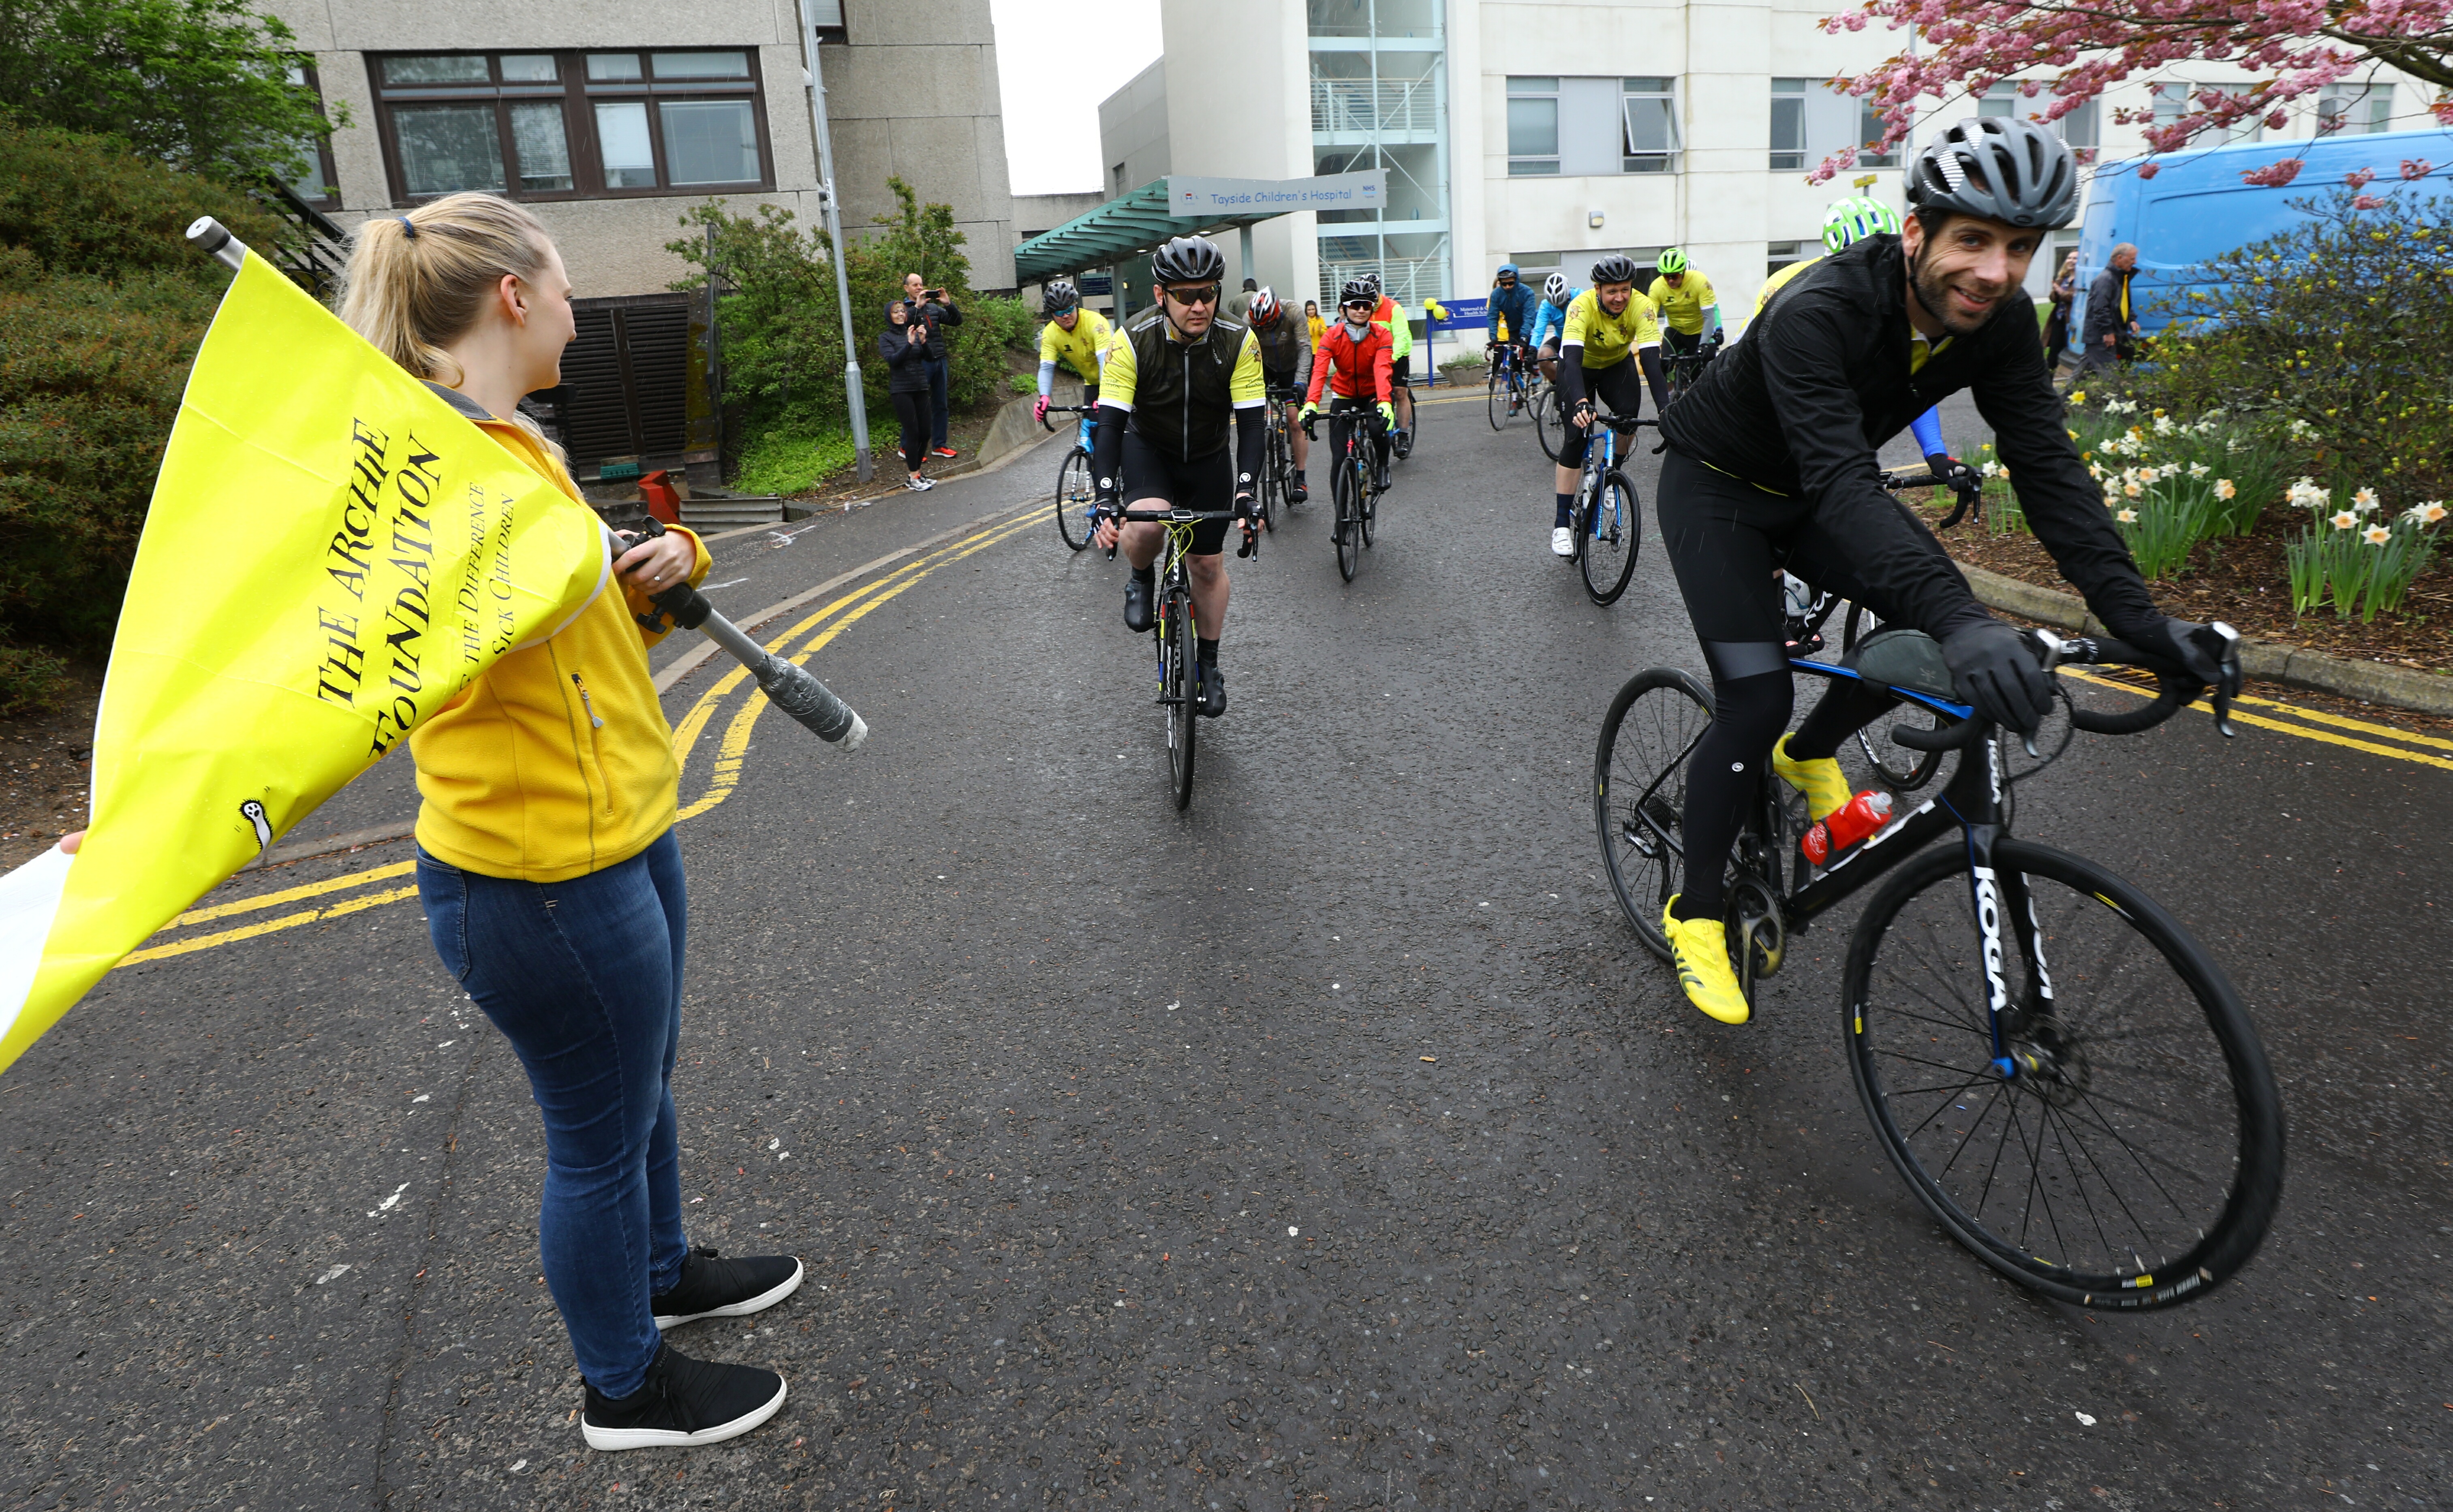 Claire Bush - National Events Manager,  flagging the cyclists off, as Mark Beaumont leads the way, on their charity ride for ARCHIE to Inverness, then Aberdeen. Friday 26th April 2019.